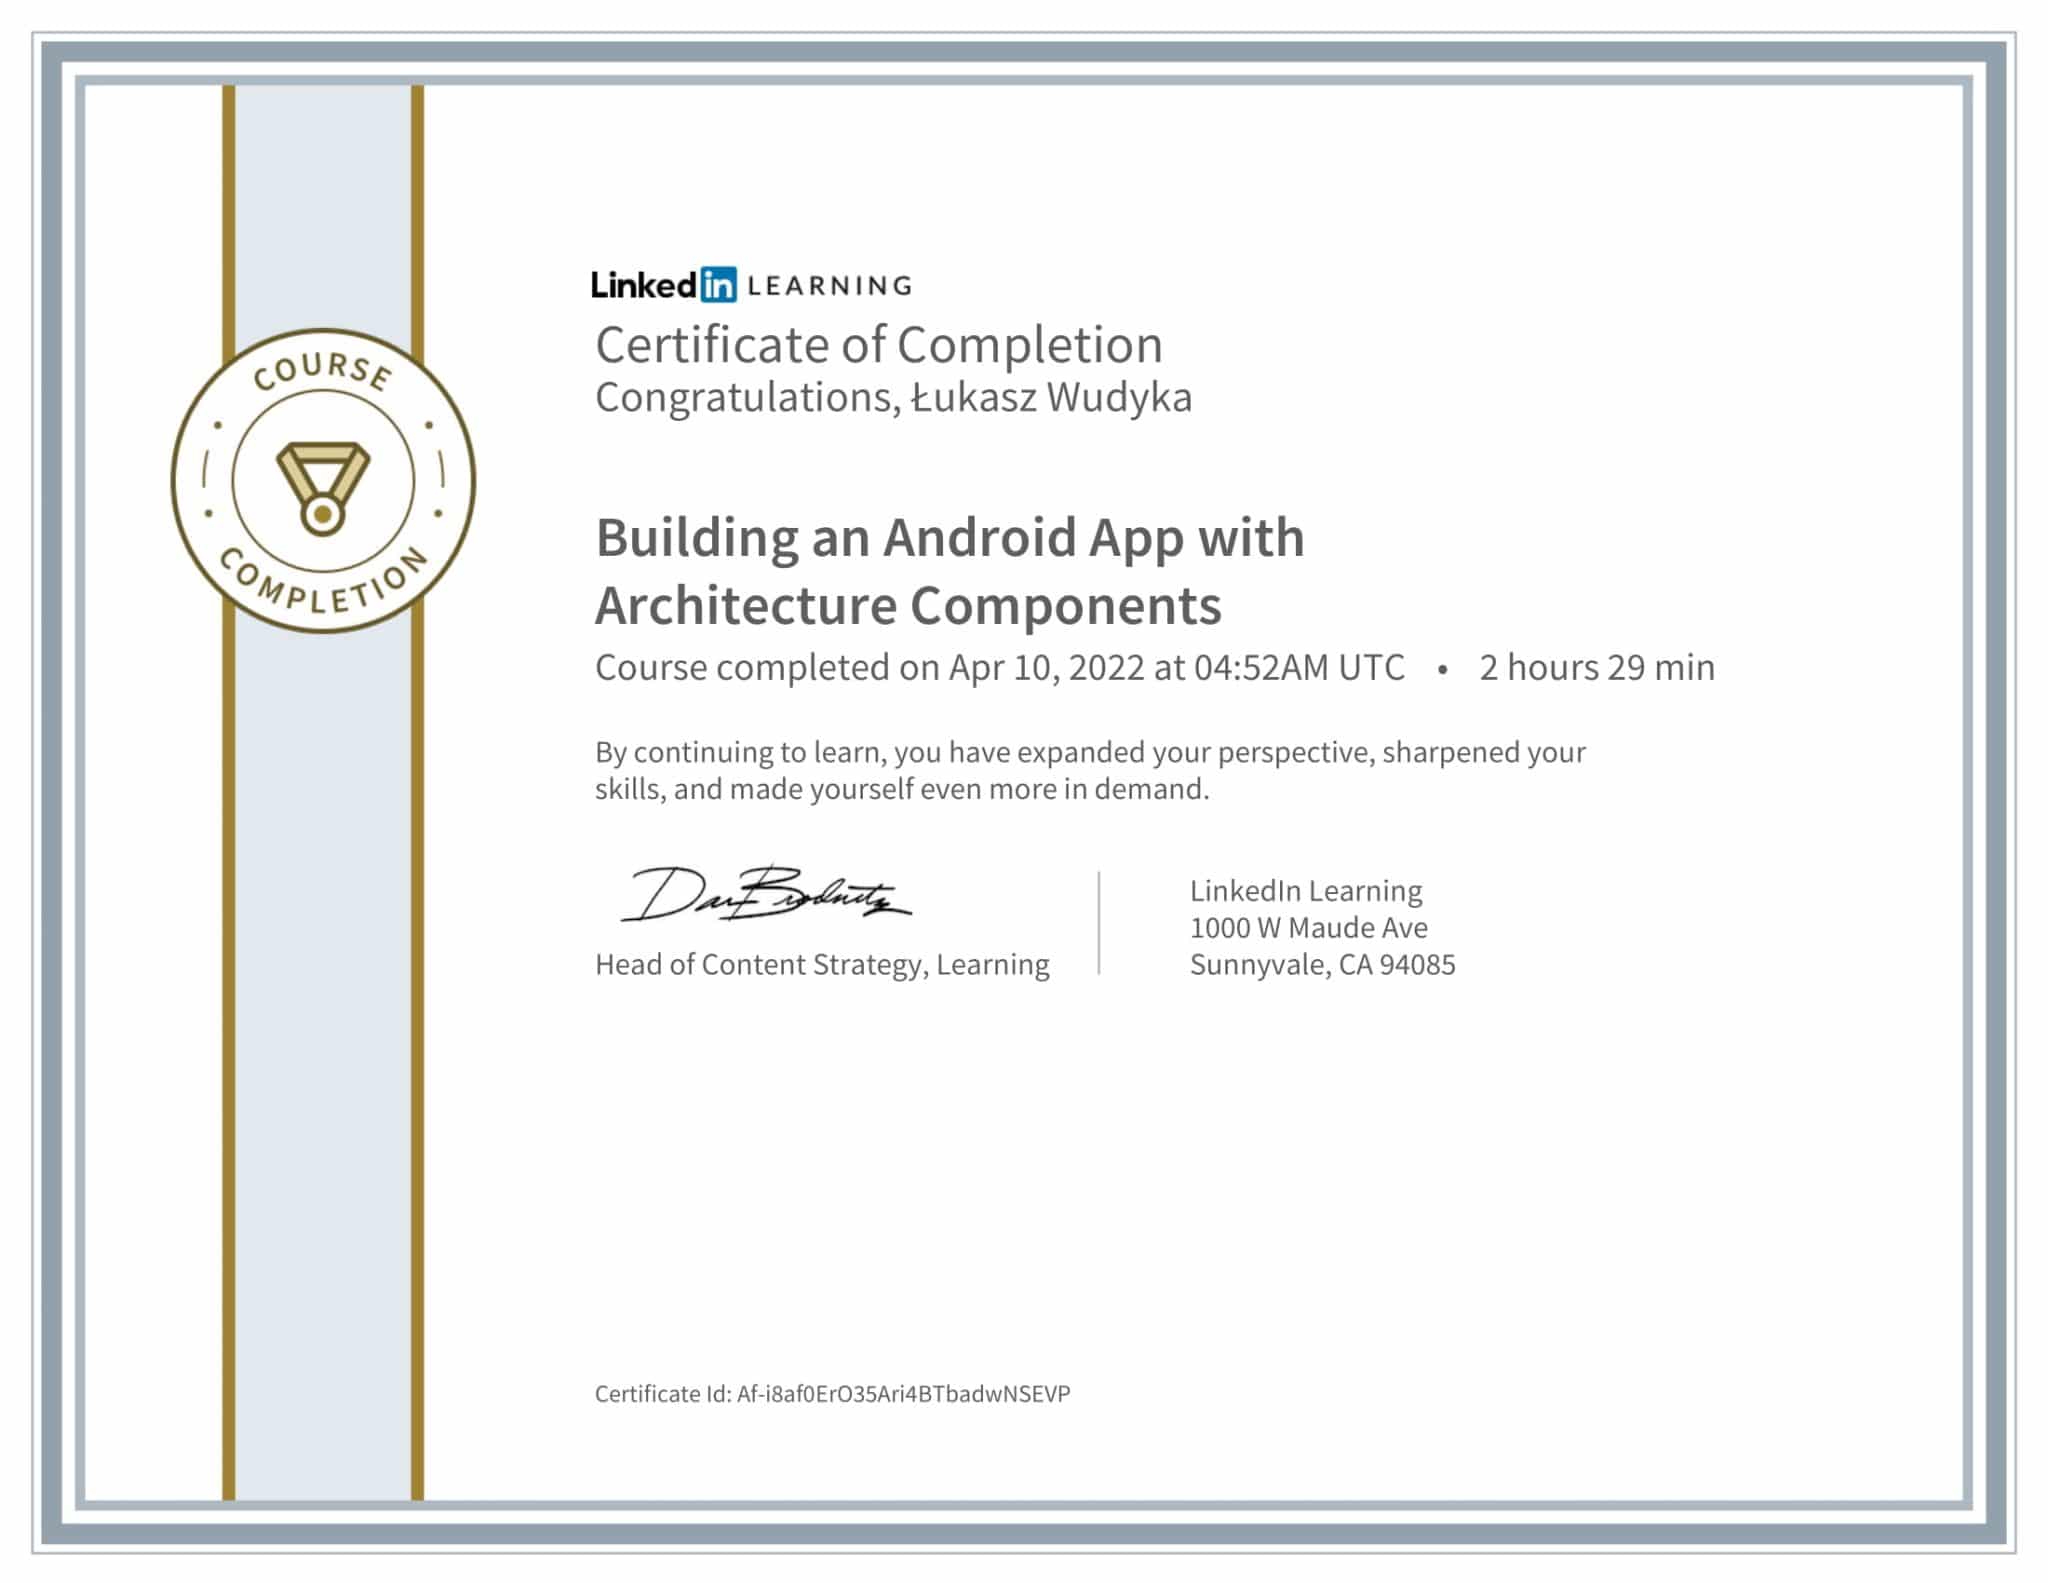 CertificateOfCompletion_Building an Android App with Architecture Components-1